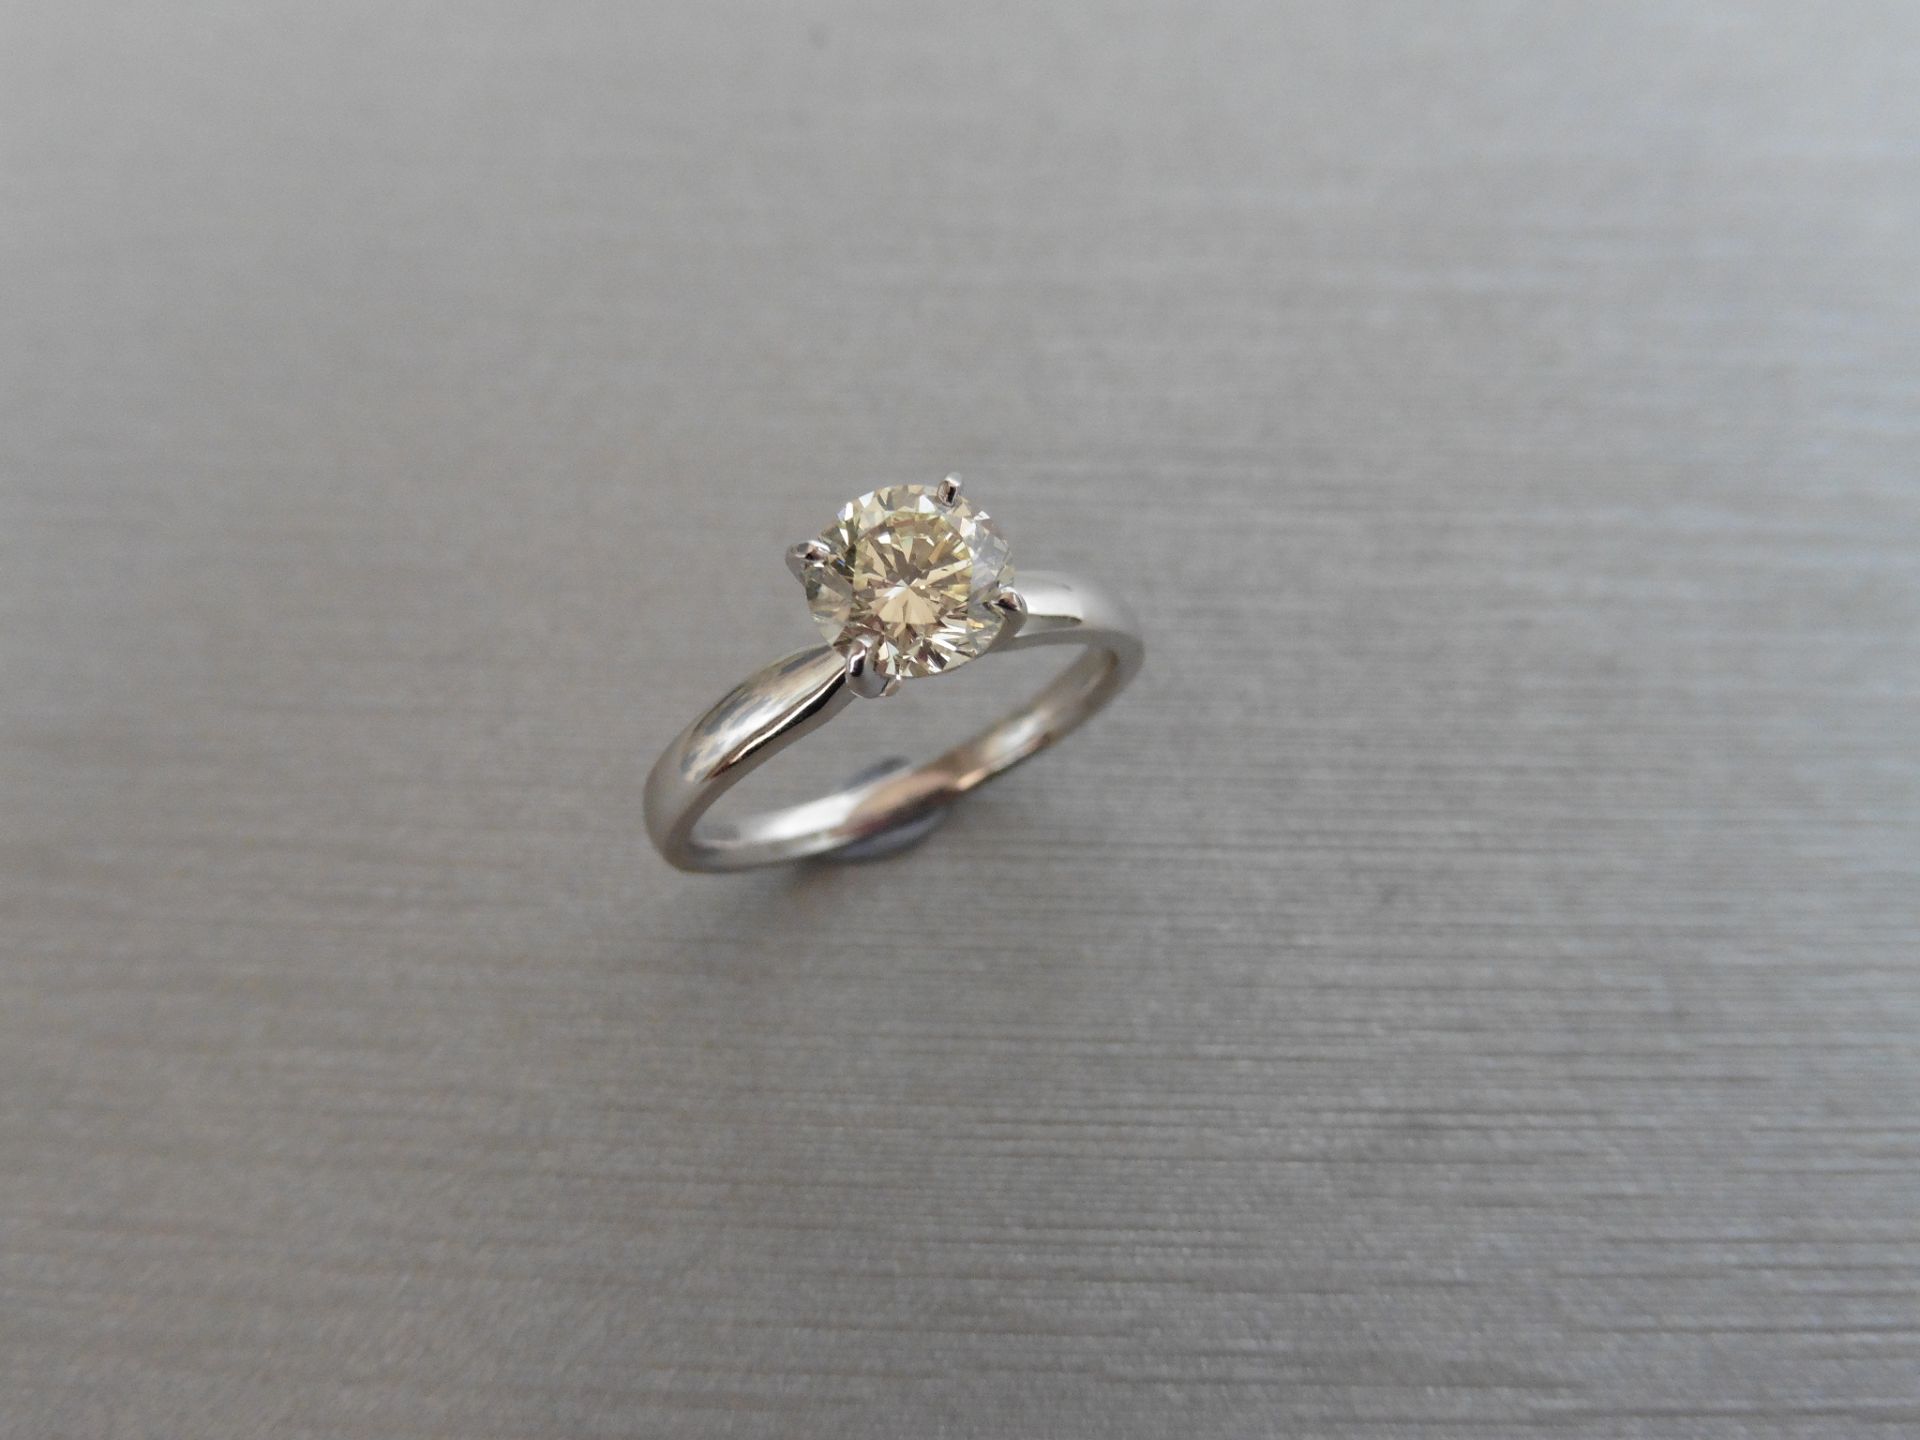 1.16ct diamond solitaire ring with a brilliant cut diamond. J colour and I1 clarity. Set in 18ct